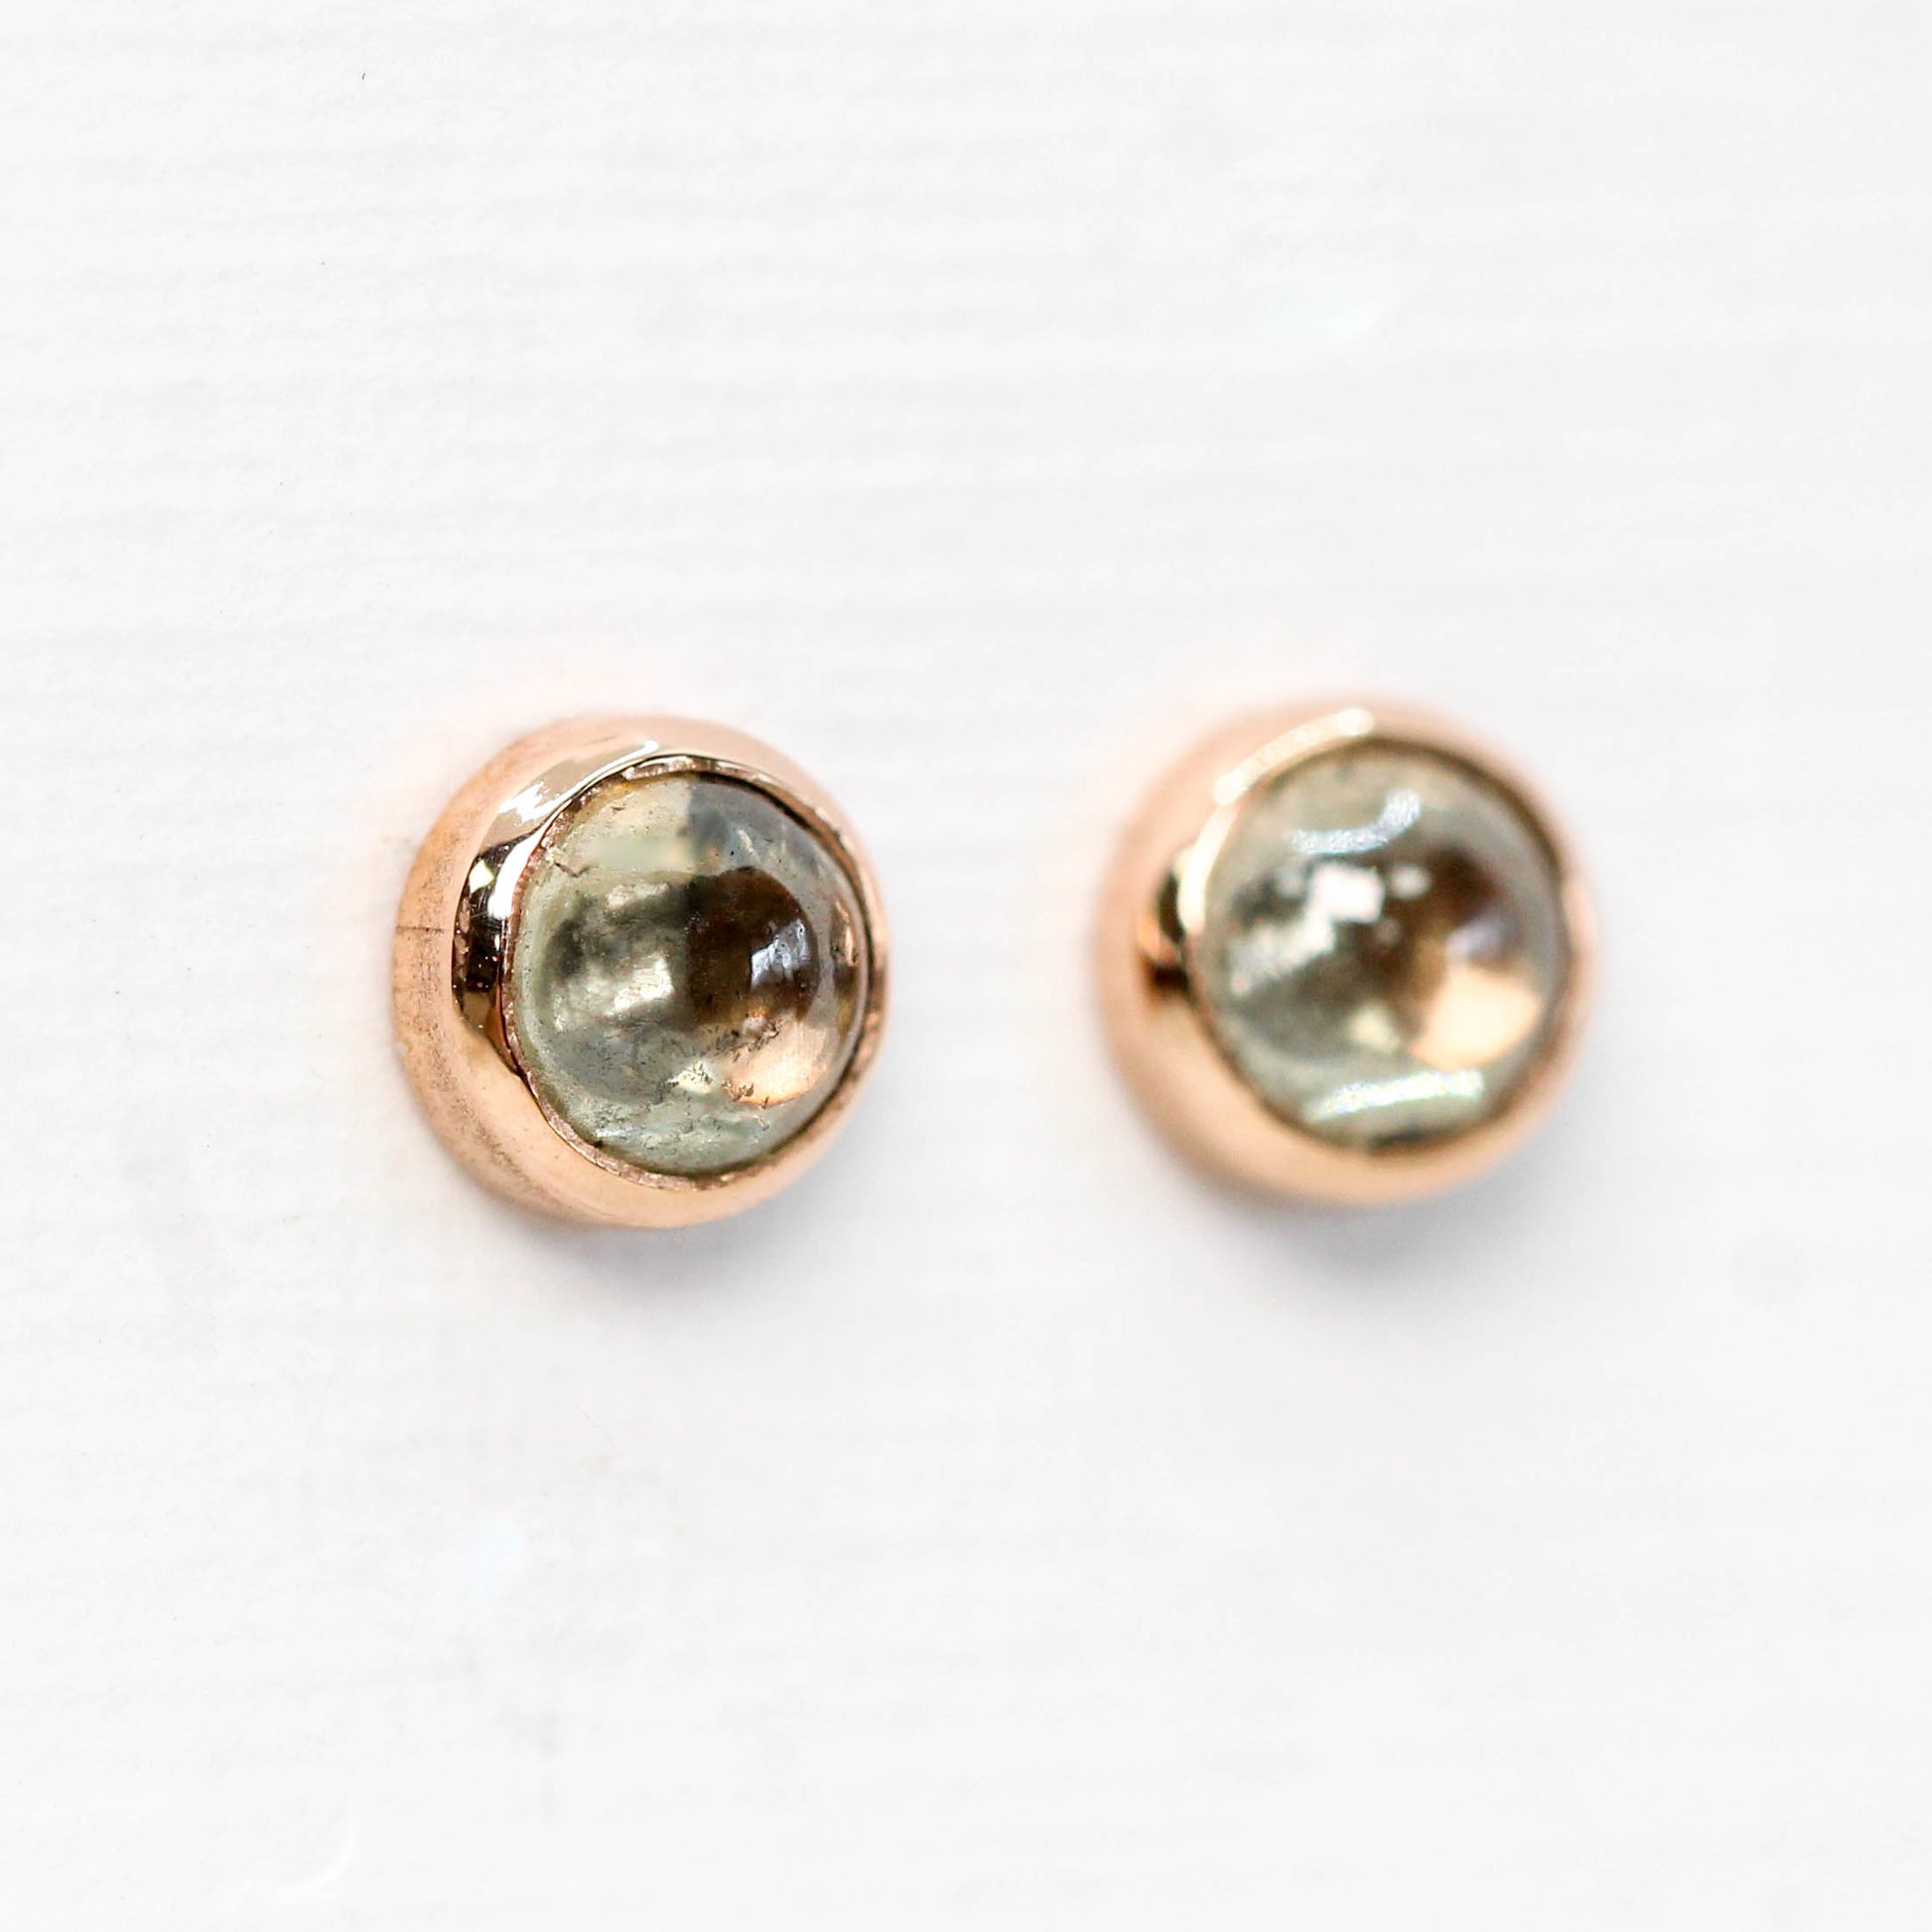 Bezel-Set Round Cabochon Cut Celestial Diamond Earrings - Choose Your Gold Tone - Midwinter Co. Alternative Bridal Rings and Modern Fine Jewelry